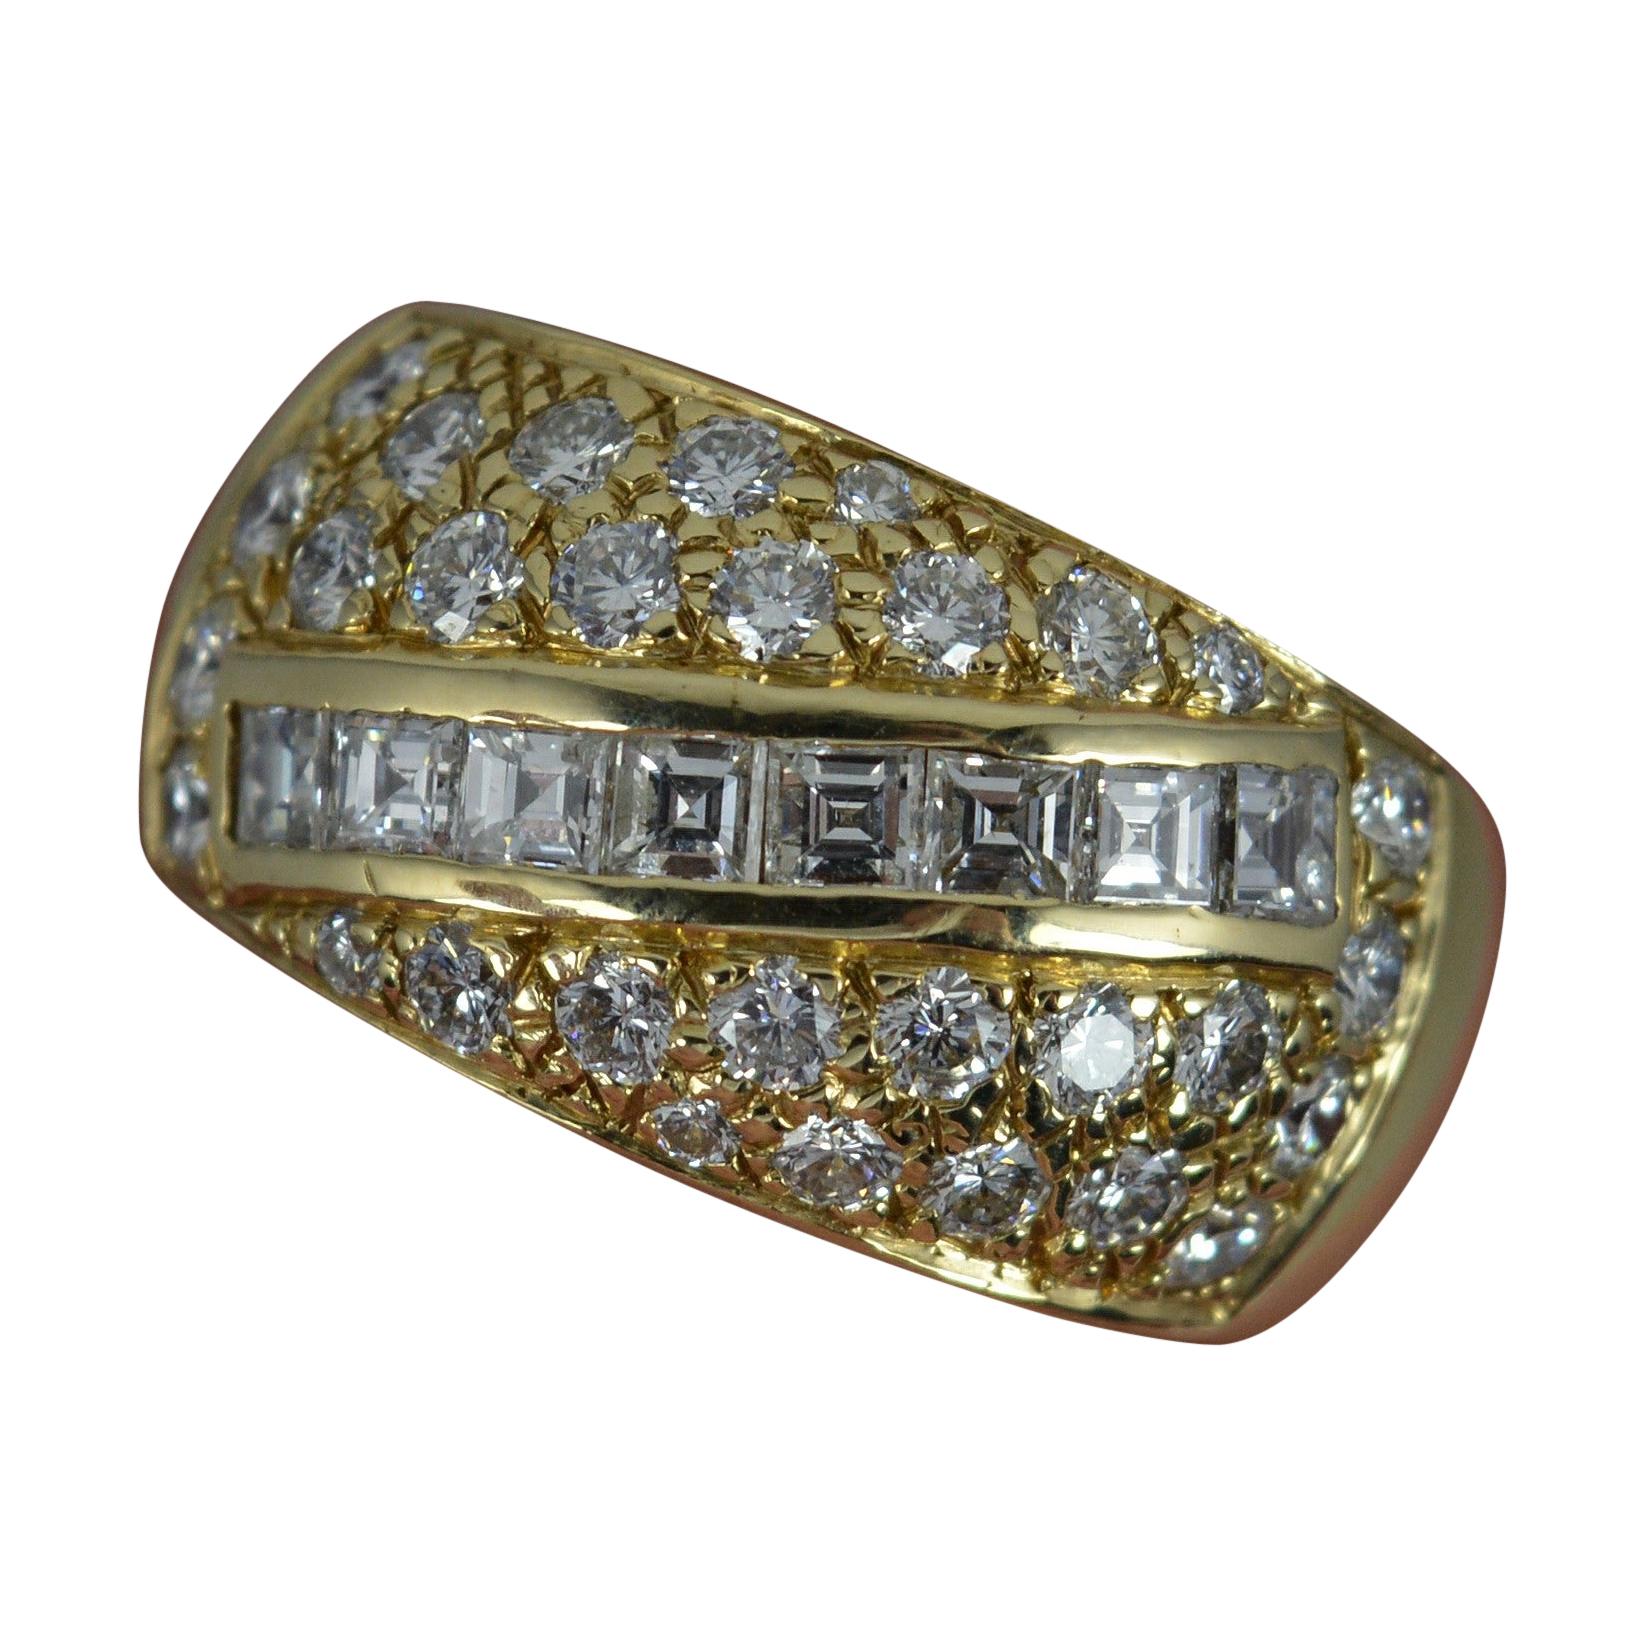 Heavy 1.85 Carat Diamond and 14 Carat Gold Bombe Cluster Ring For Sale